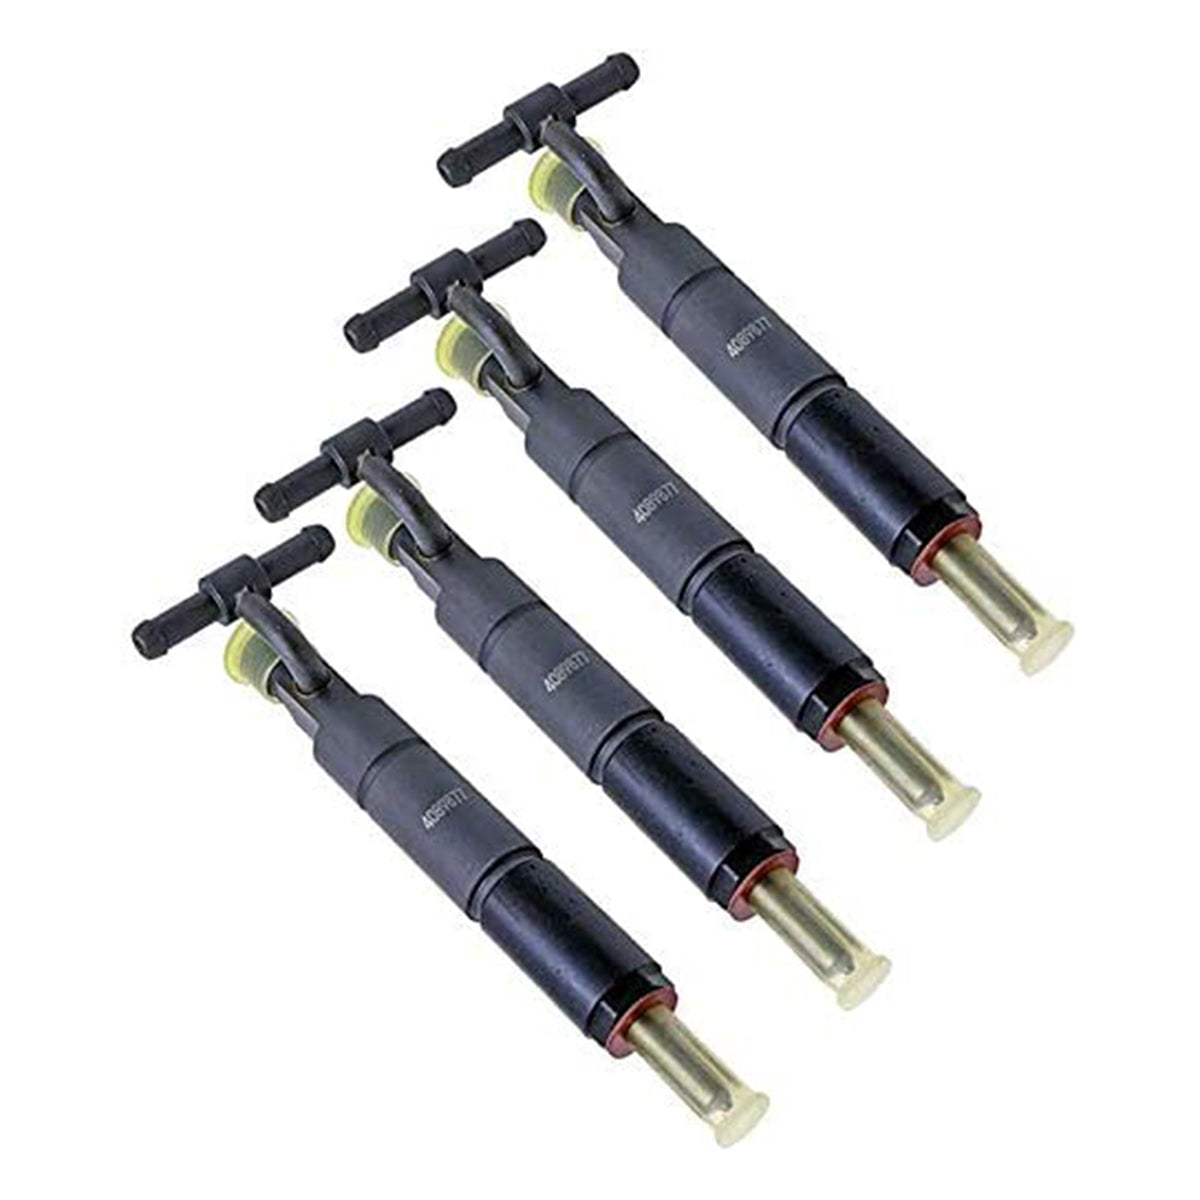 Fuel Injector 4089877 for Cummins B3.3, Fuel Injector for Cummins B3.3, Daysyore Fuel Injector, Car Fuel Injector, Auto Fuel Injector